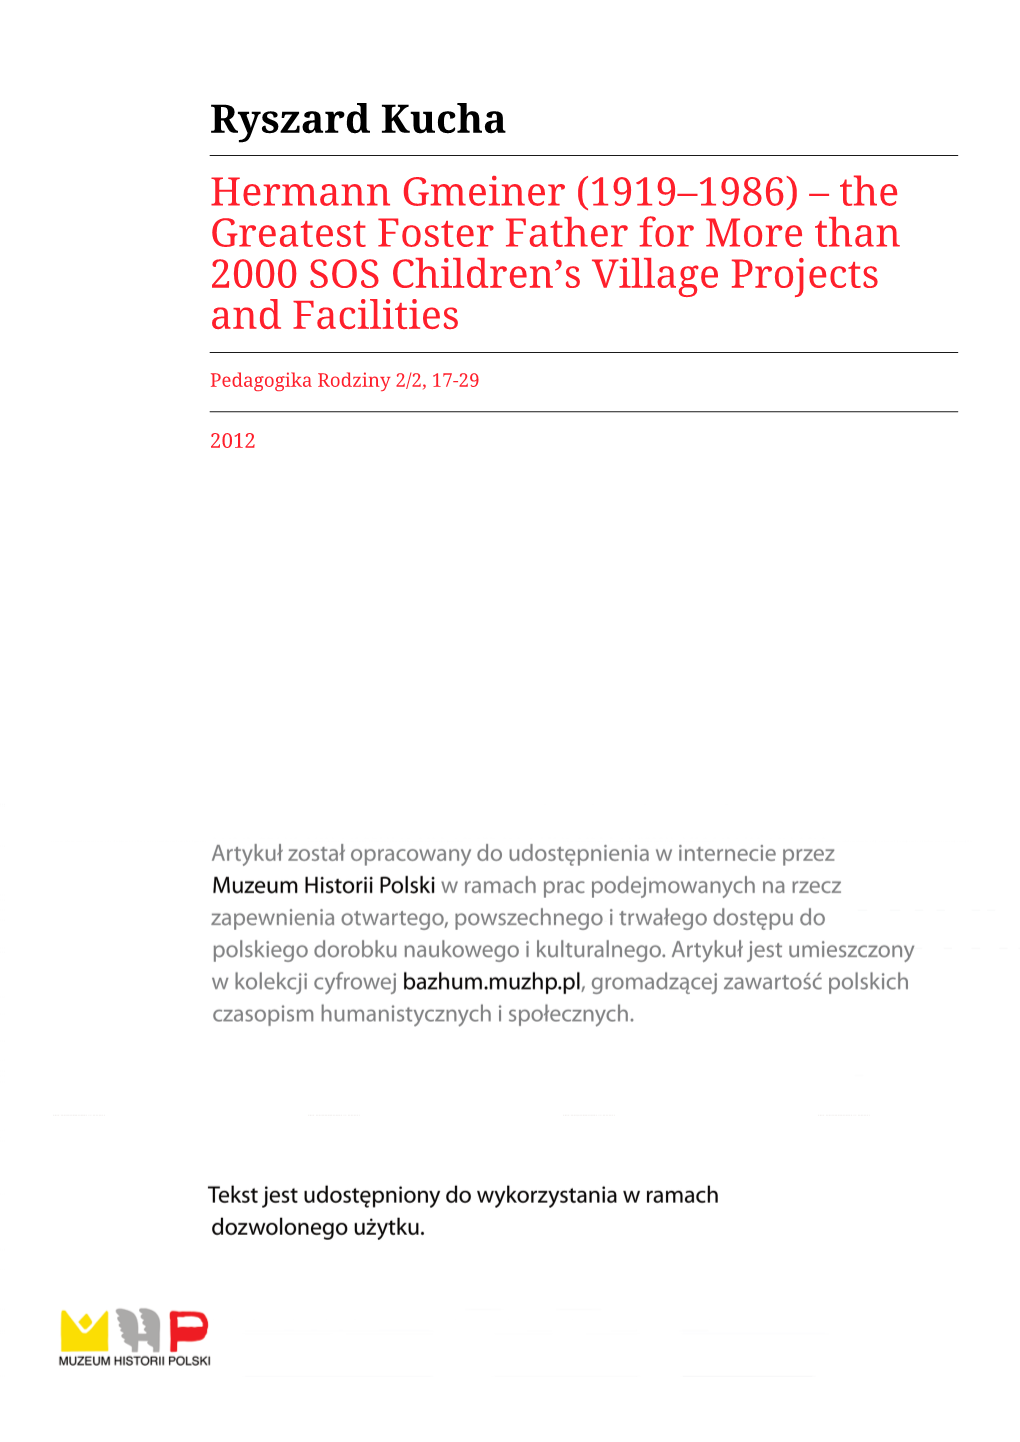 Hermann Gmeiner (1919–1986) – the Greatest Foster Father for More Than 2000 SOS Children’S Village Projects and Facilities